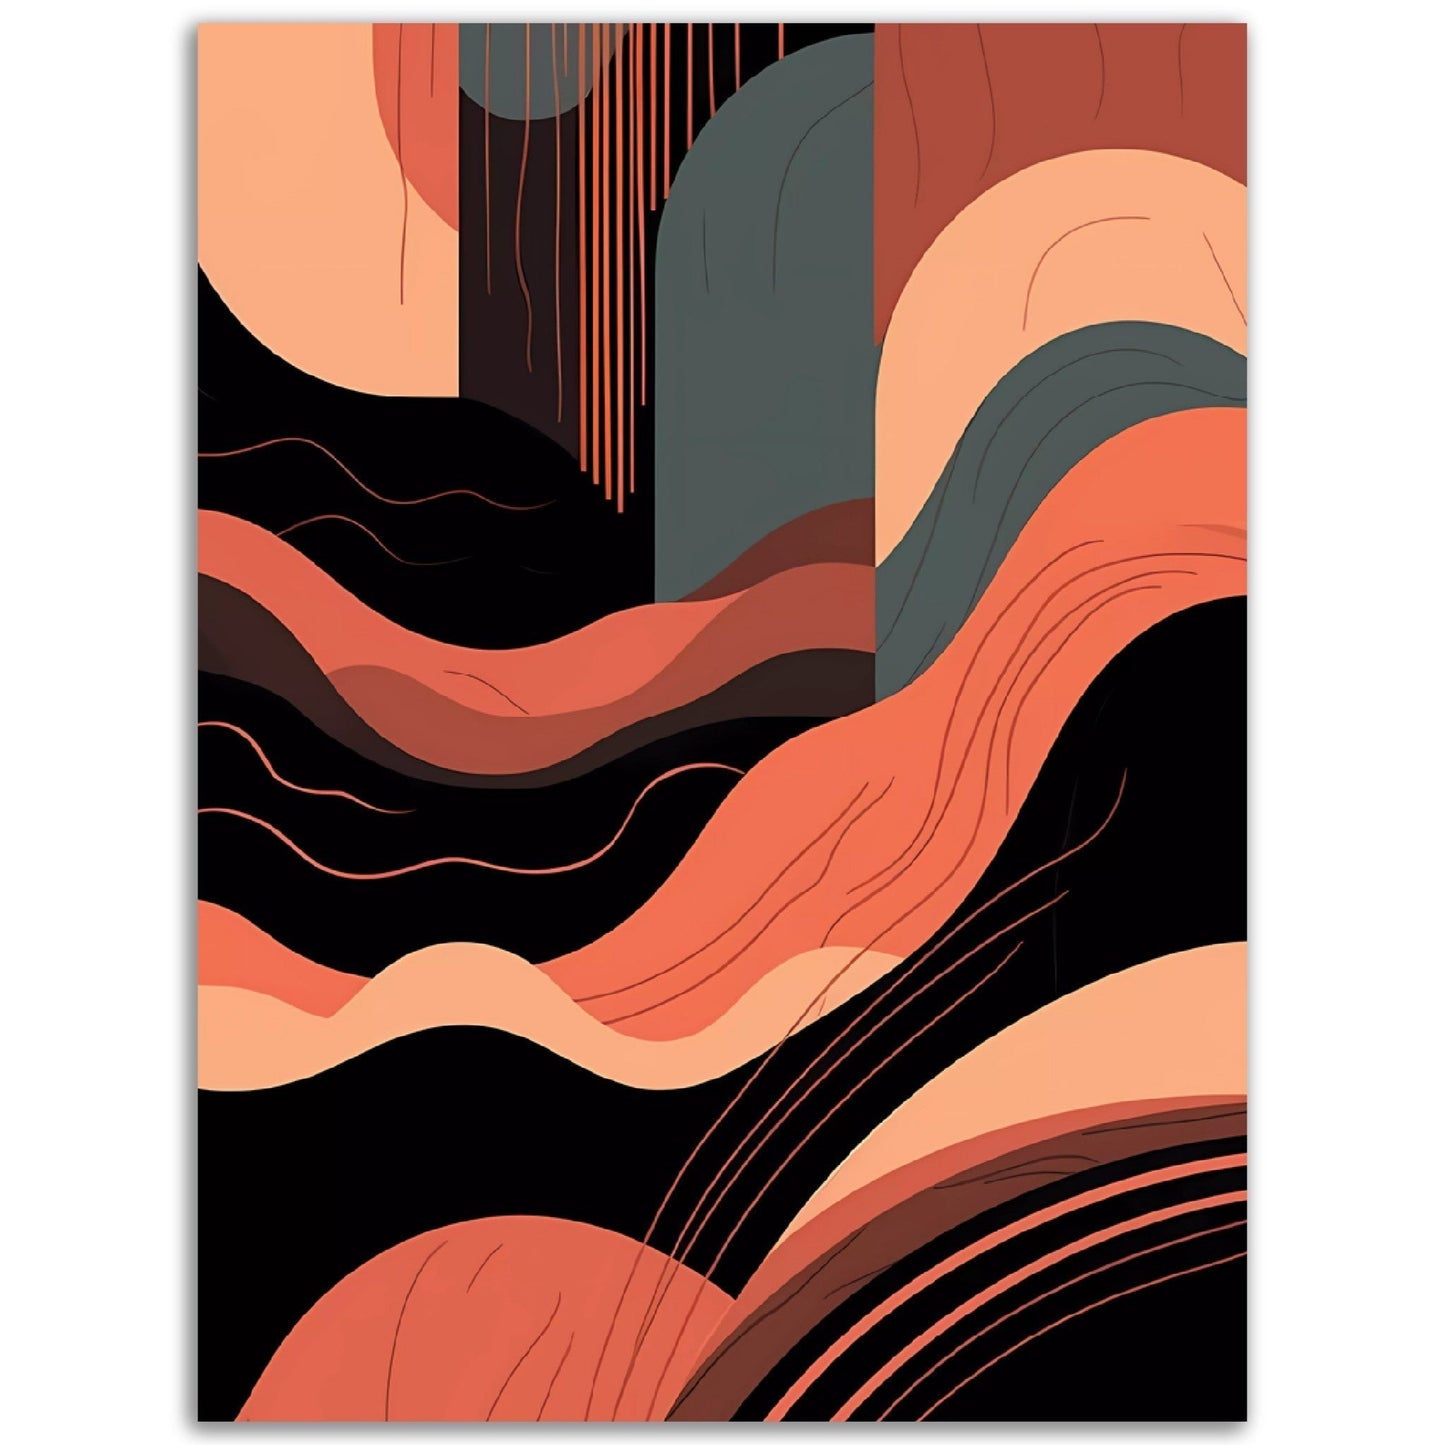 A black and orange Muted Waves art print, perfect for wall art or as a poster for your room.